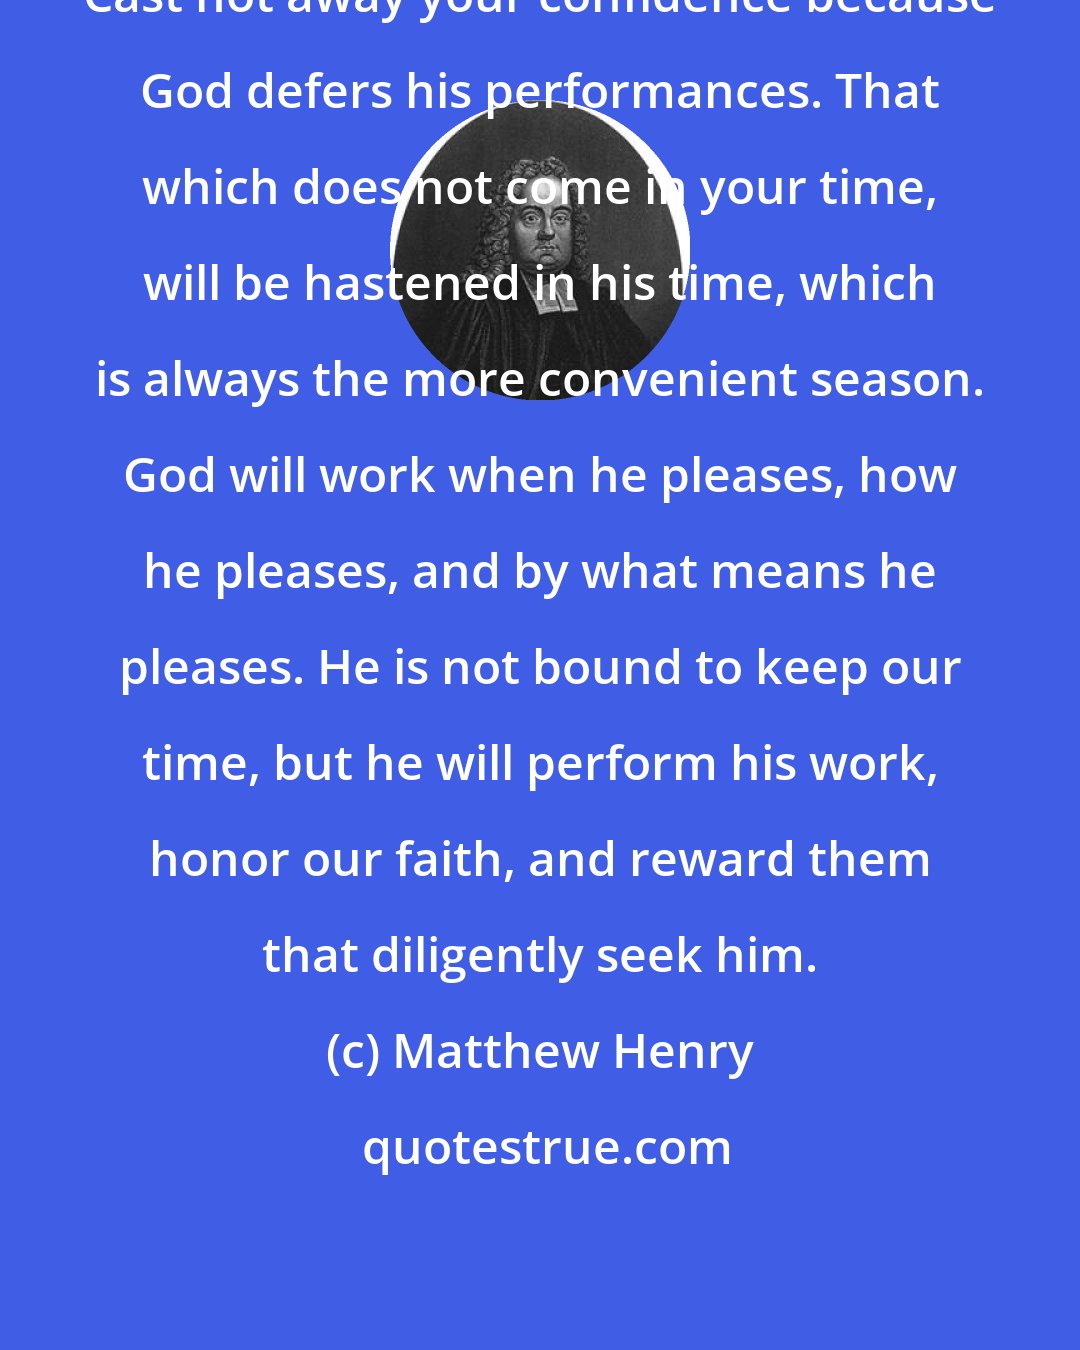 Matthew Henry: Cast not away your confidence because God defers his performances. That which does not come in your time, will be hastened in his time, which is always the more convenient season. God will work when he pleases, how he pleases, and by what means he pleases. He is not bound to keep our time, but he will perform his work, honor our faith, and reward them that diligently seek him.